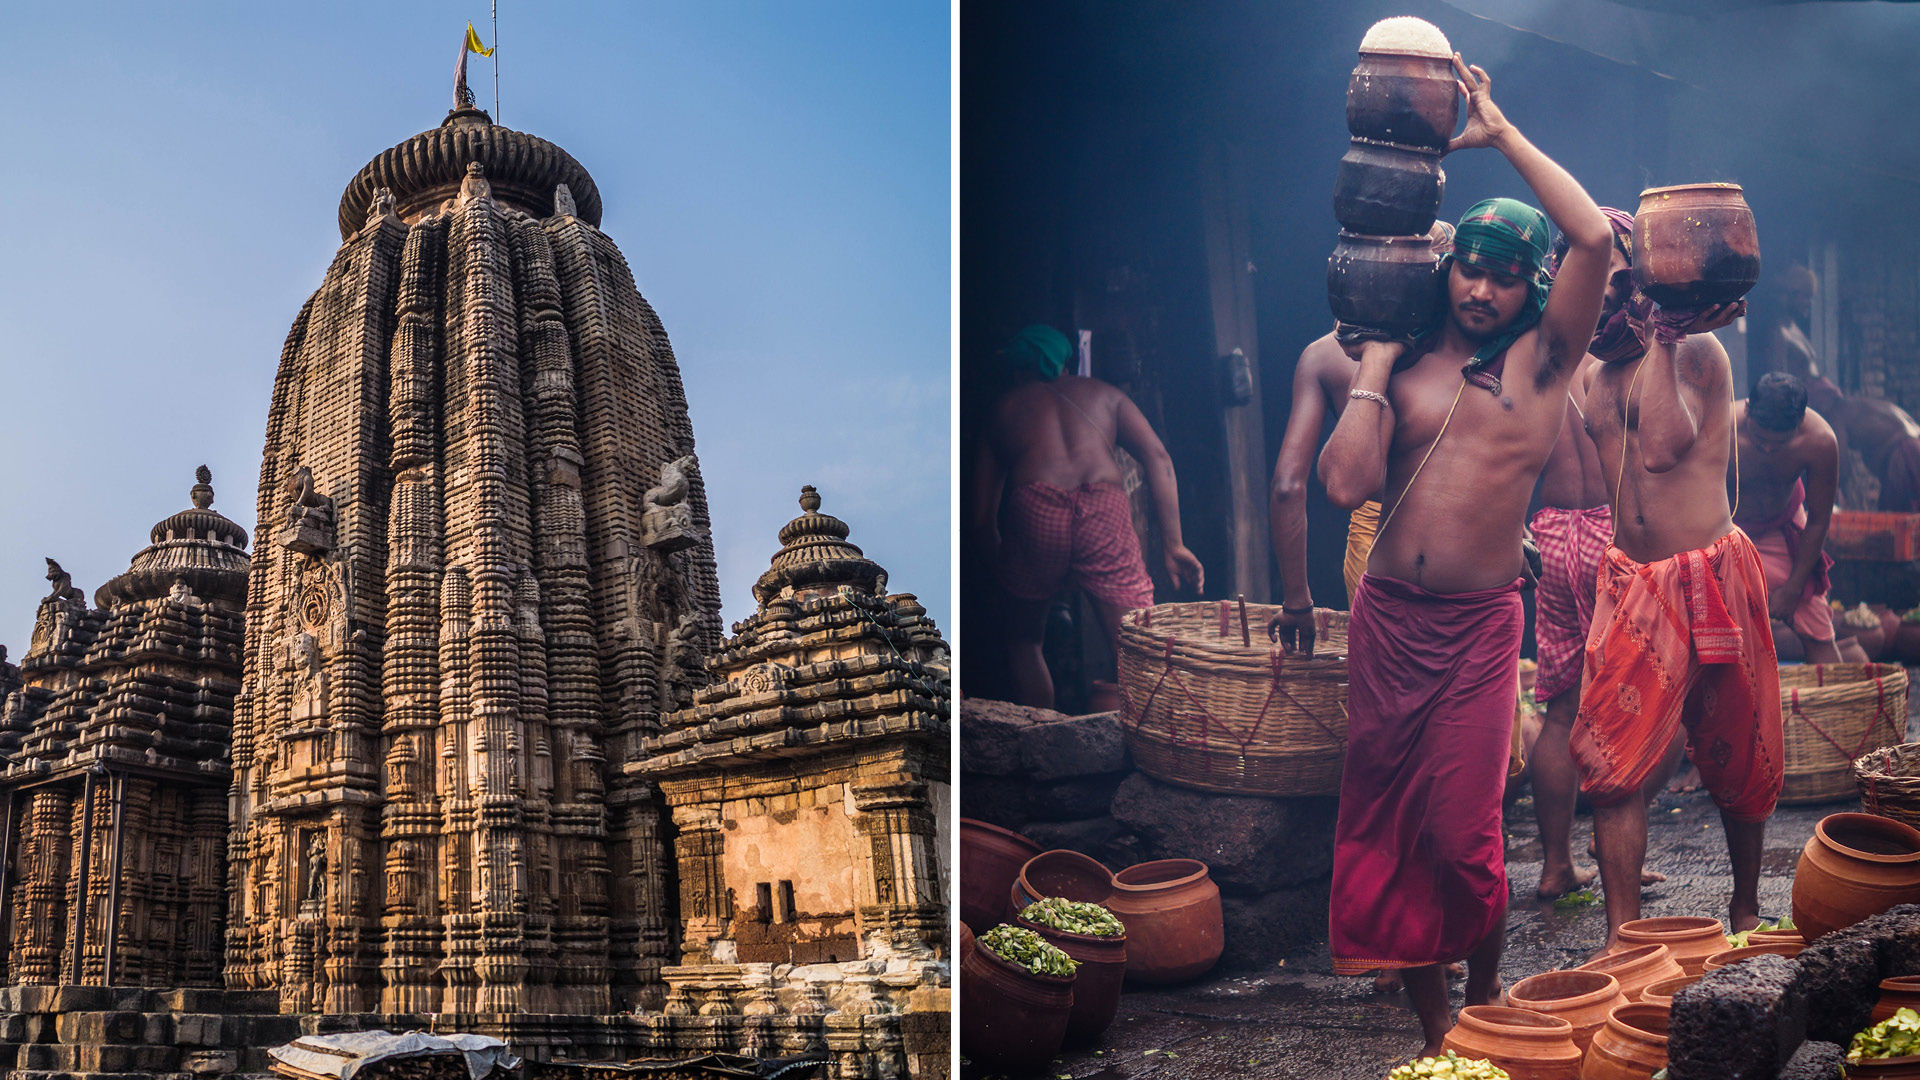 An Insight Into Bhubaneswar's Centuries-Old Temple Kitchens